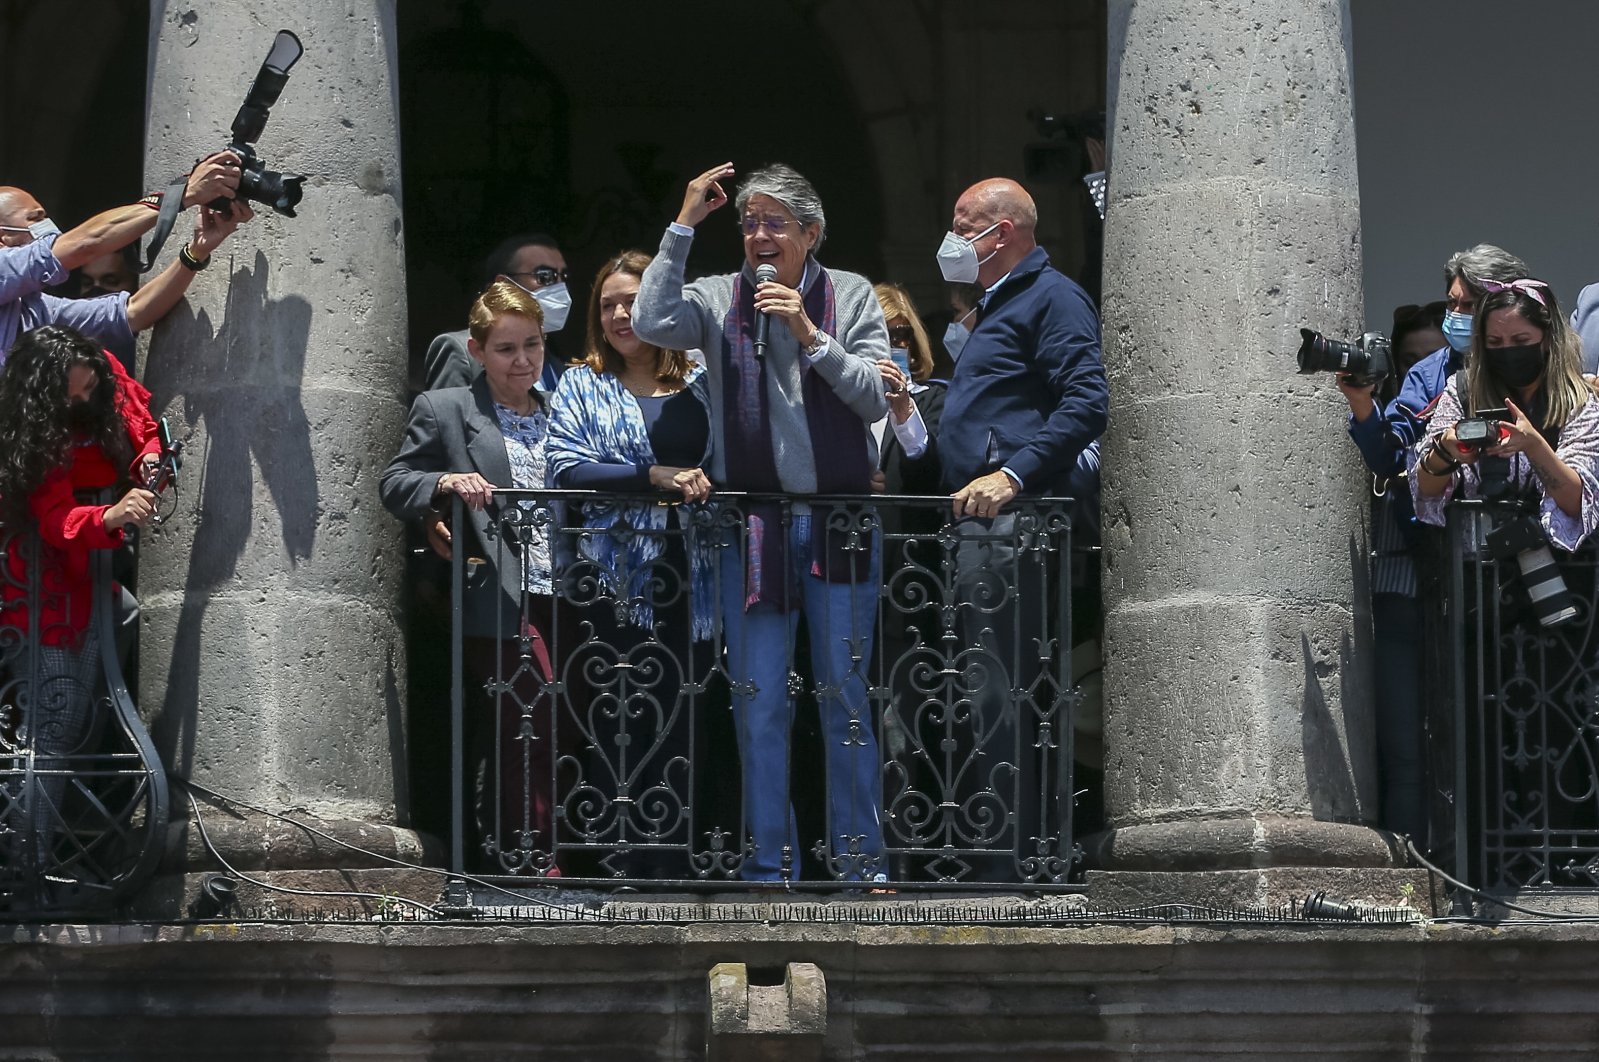 The president of Ecuador, Guillermo Lasso (C), along with his wife Maria de Lourdes Alcivar (L), and his vice president, Alfredo Borrero (R), talk to supporters from a balcony of the government palace, in Quito, Ecuador, Oct. 20, 2021. (EPA Photo)